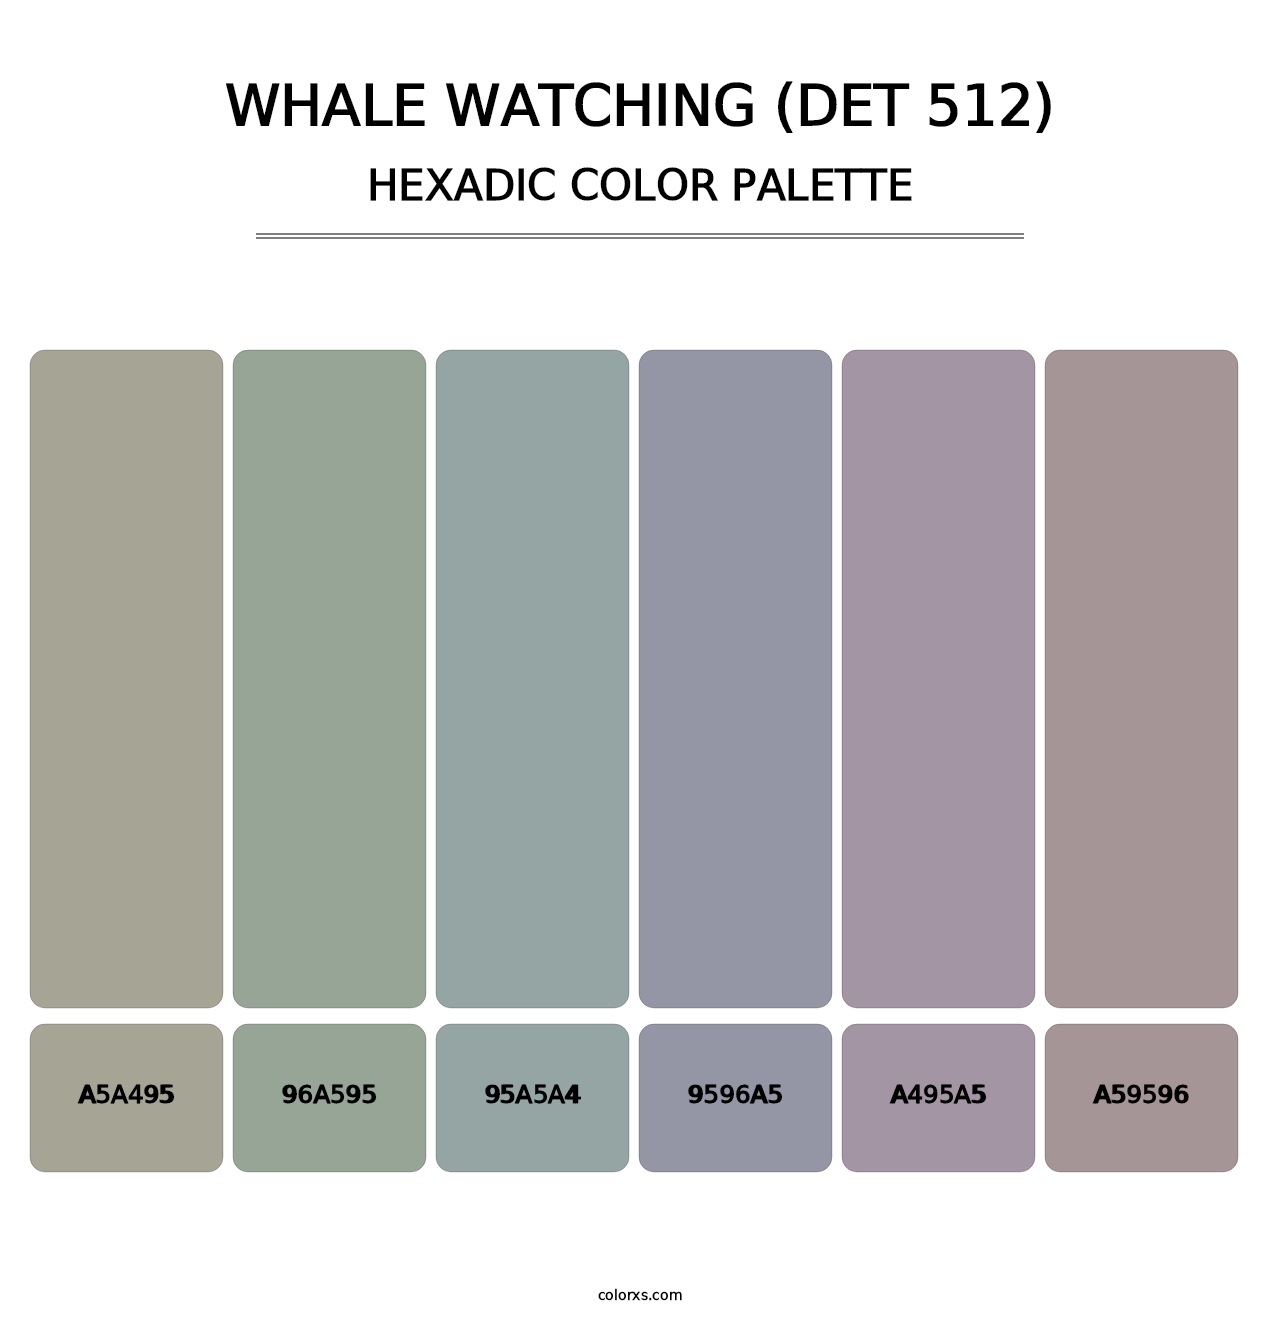 Whale Watching (DET 512) - Hexadic Color Palette